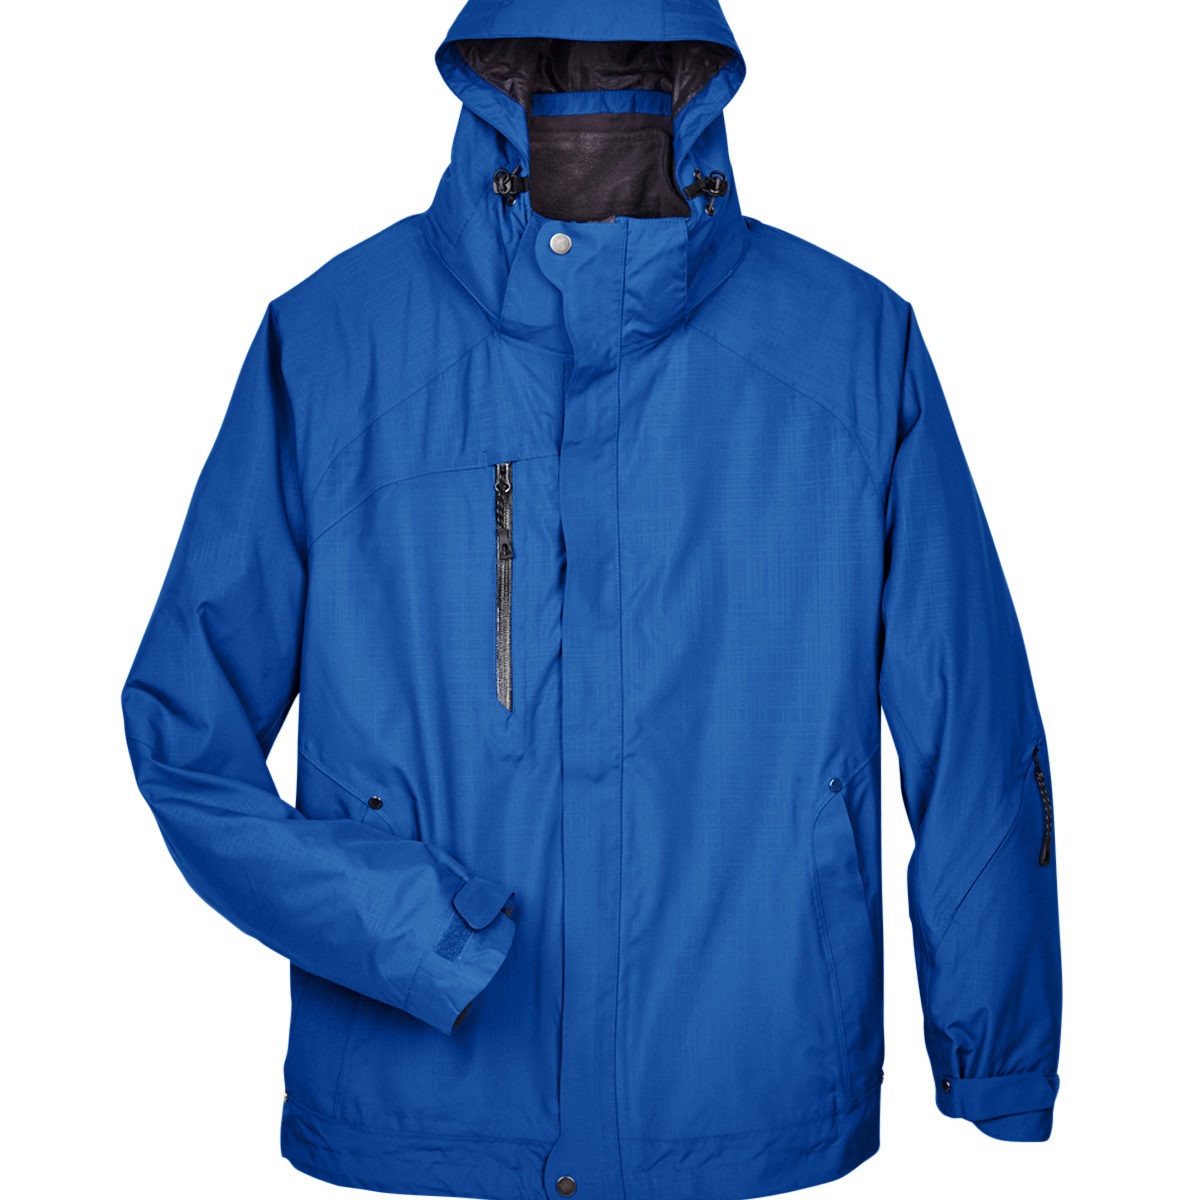 NORTH END MEN'S CAPRICE 3-IN-1 JACKET WITH SOFT SHELL LINER - Great ...